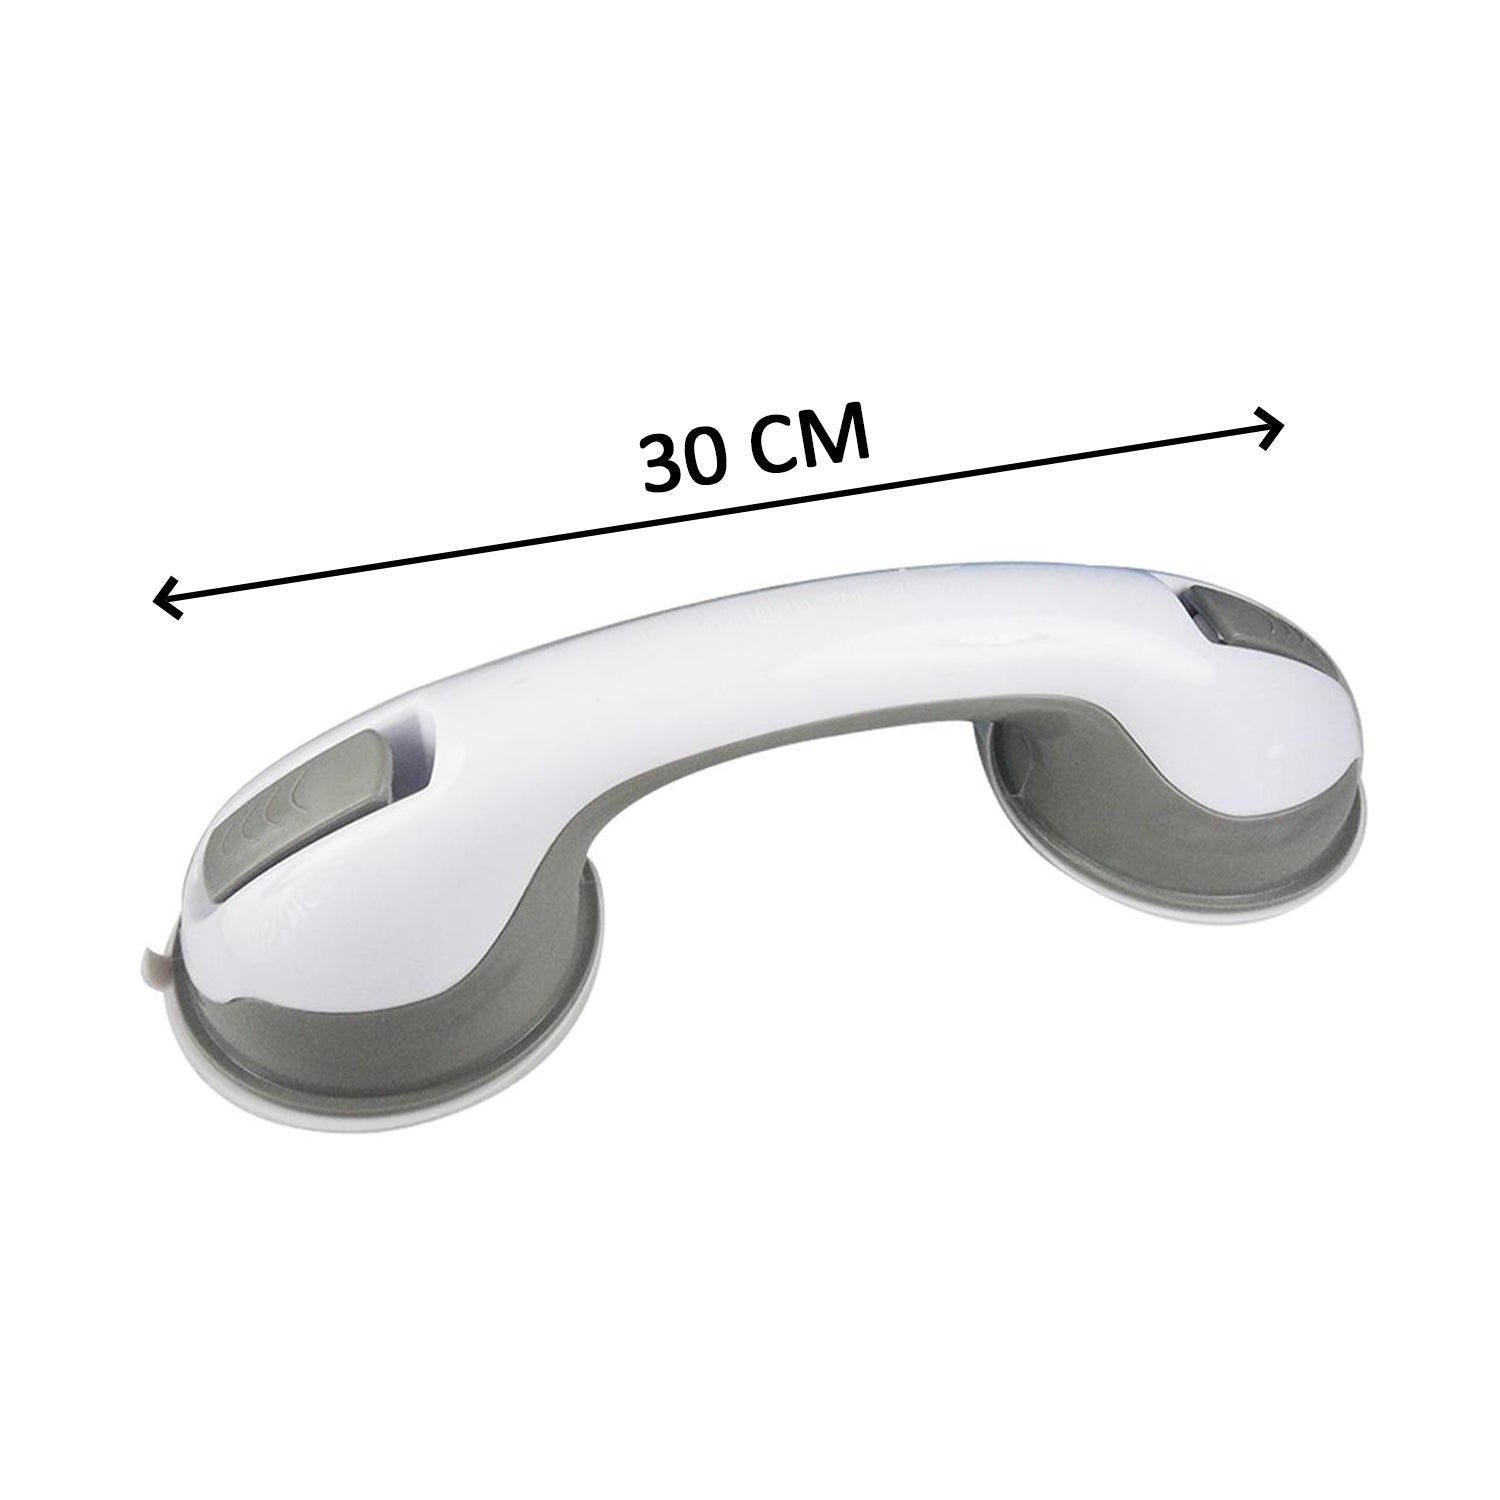 6148 Helping Handle used to give a helpful handle in case of door stuck and lack of opening it and all purposes, and can be used in mostly any kinds of places like offices and household etc - DeoDap